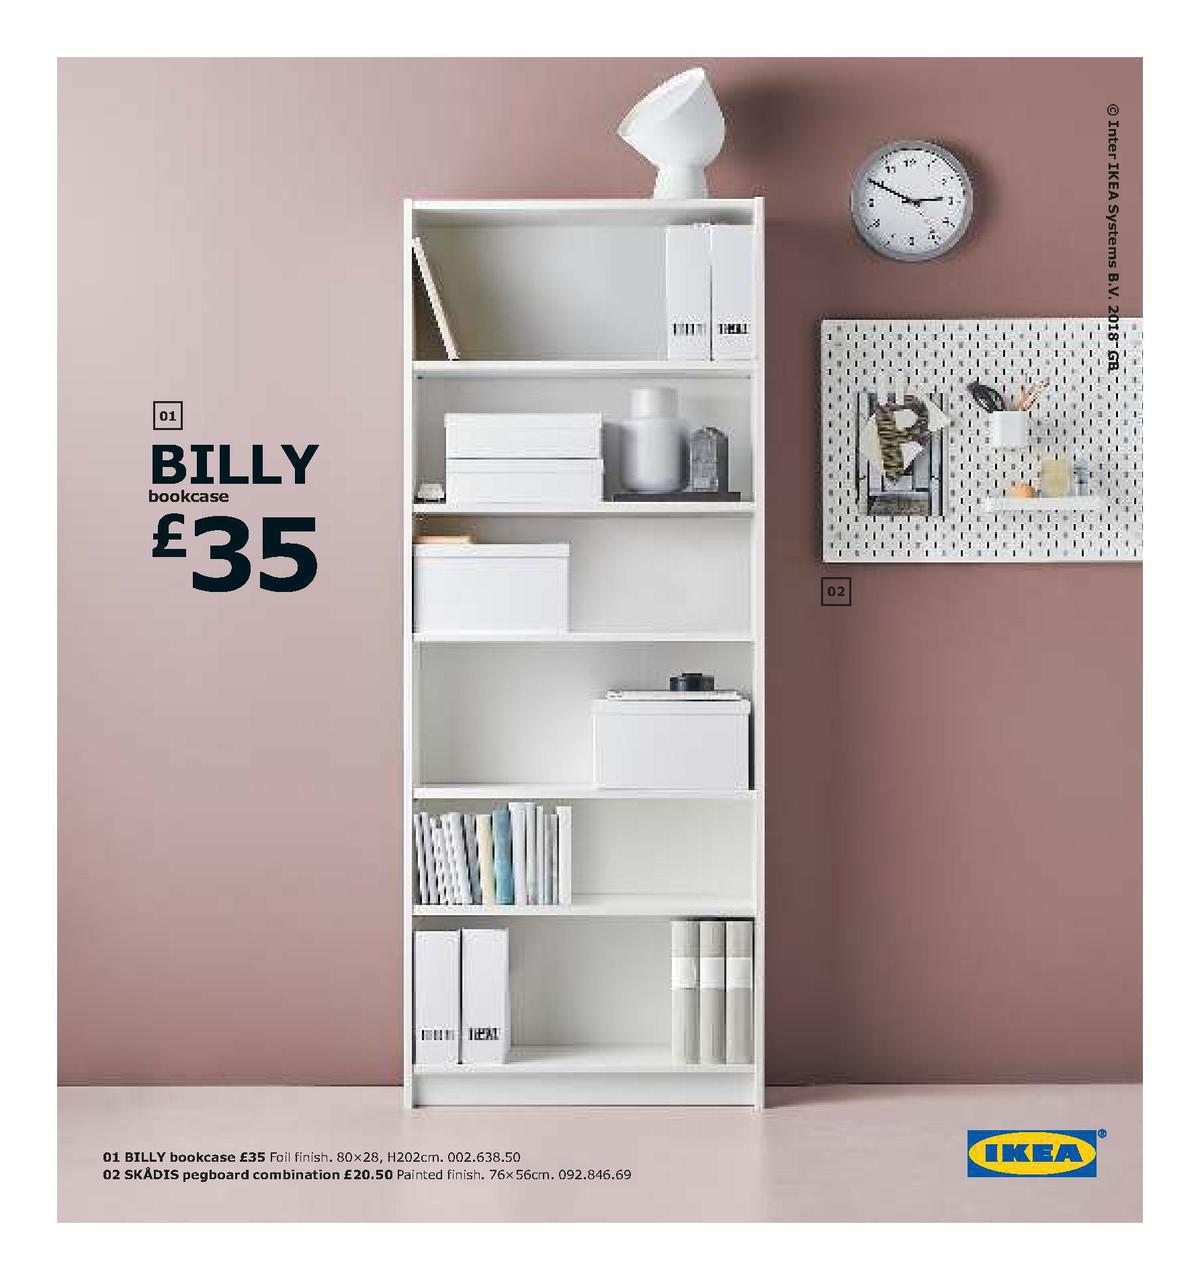 IKEA Offers from 1 January